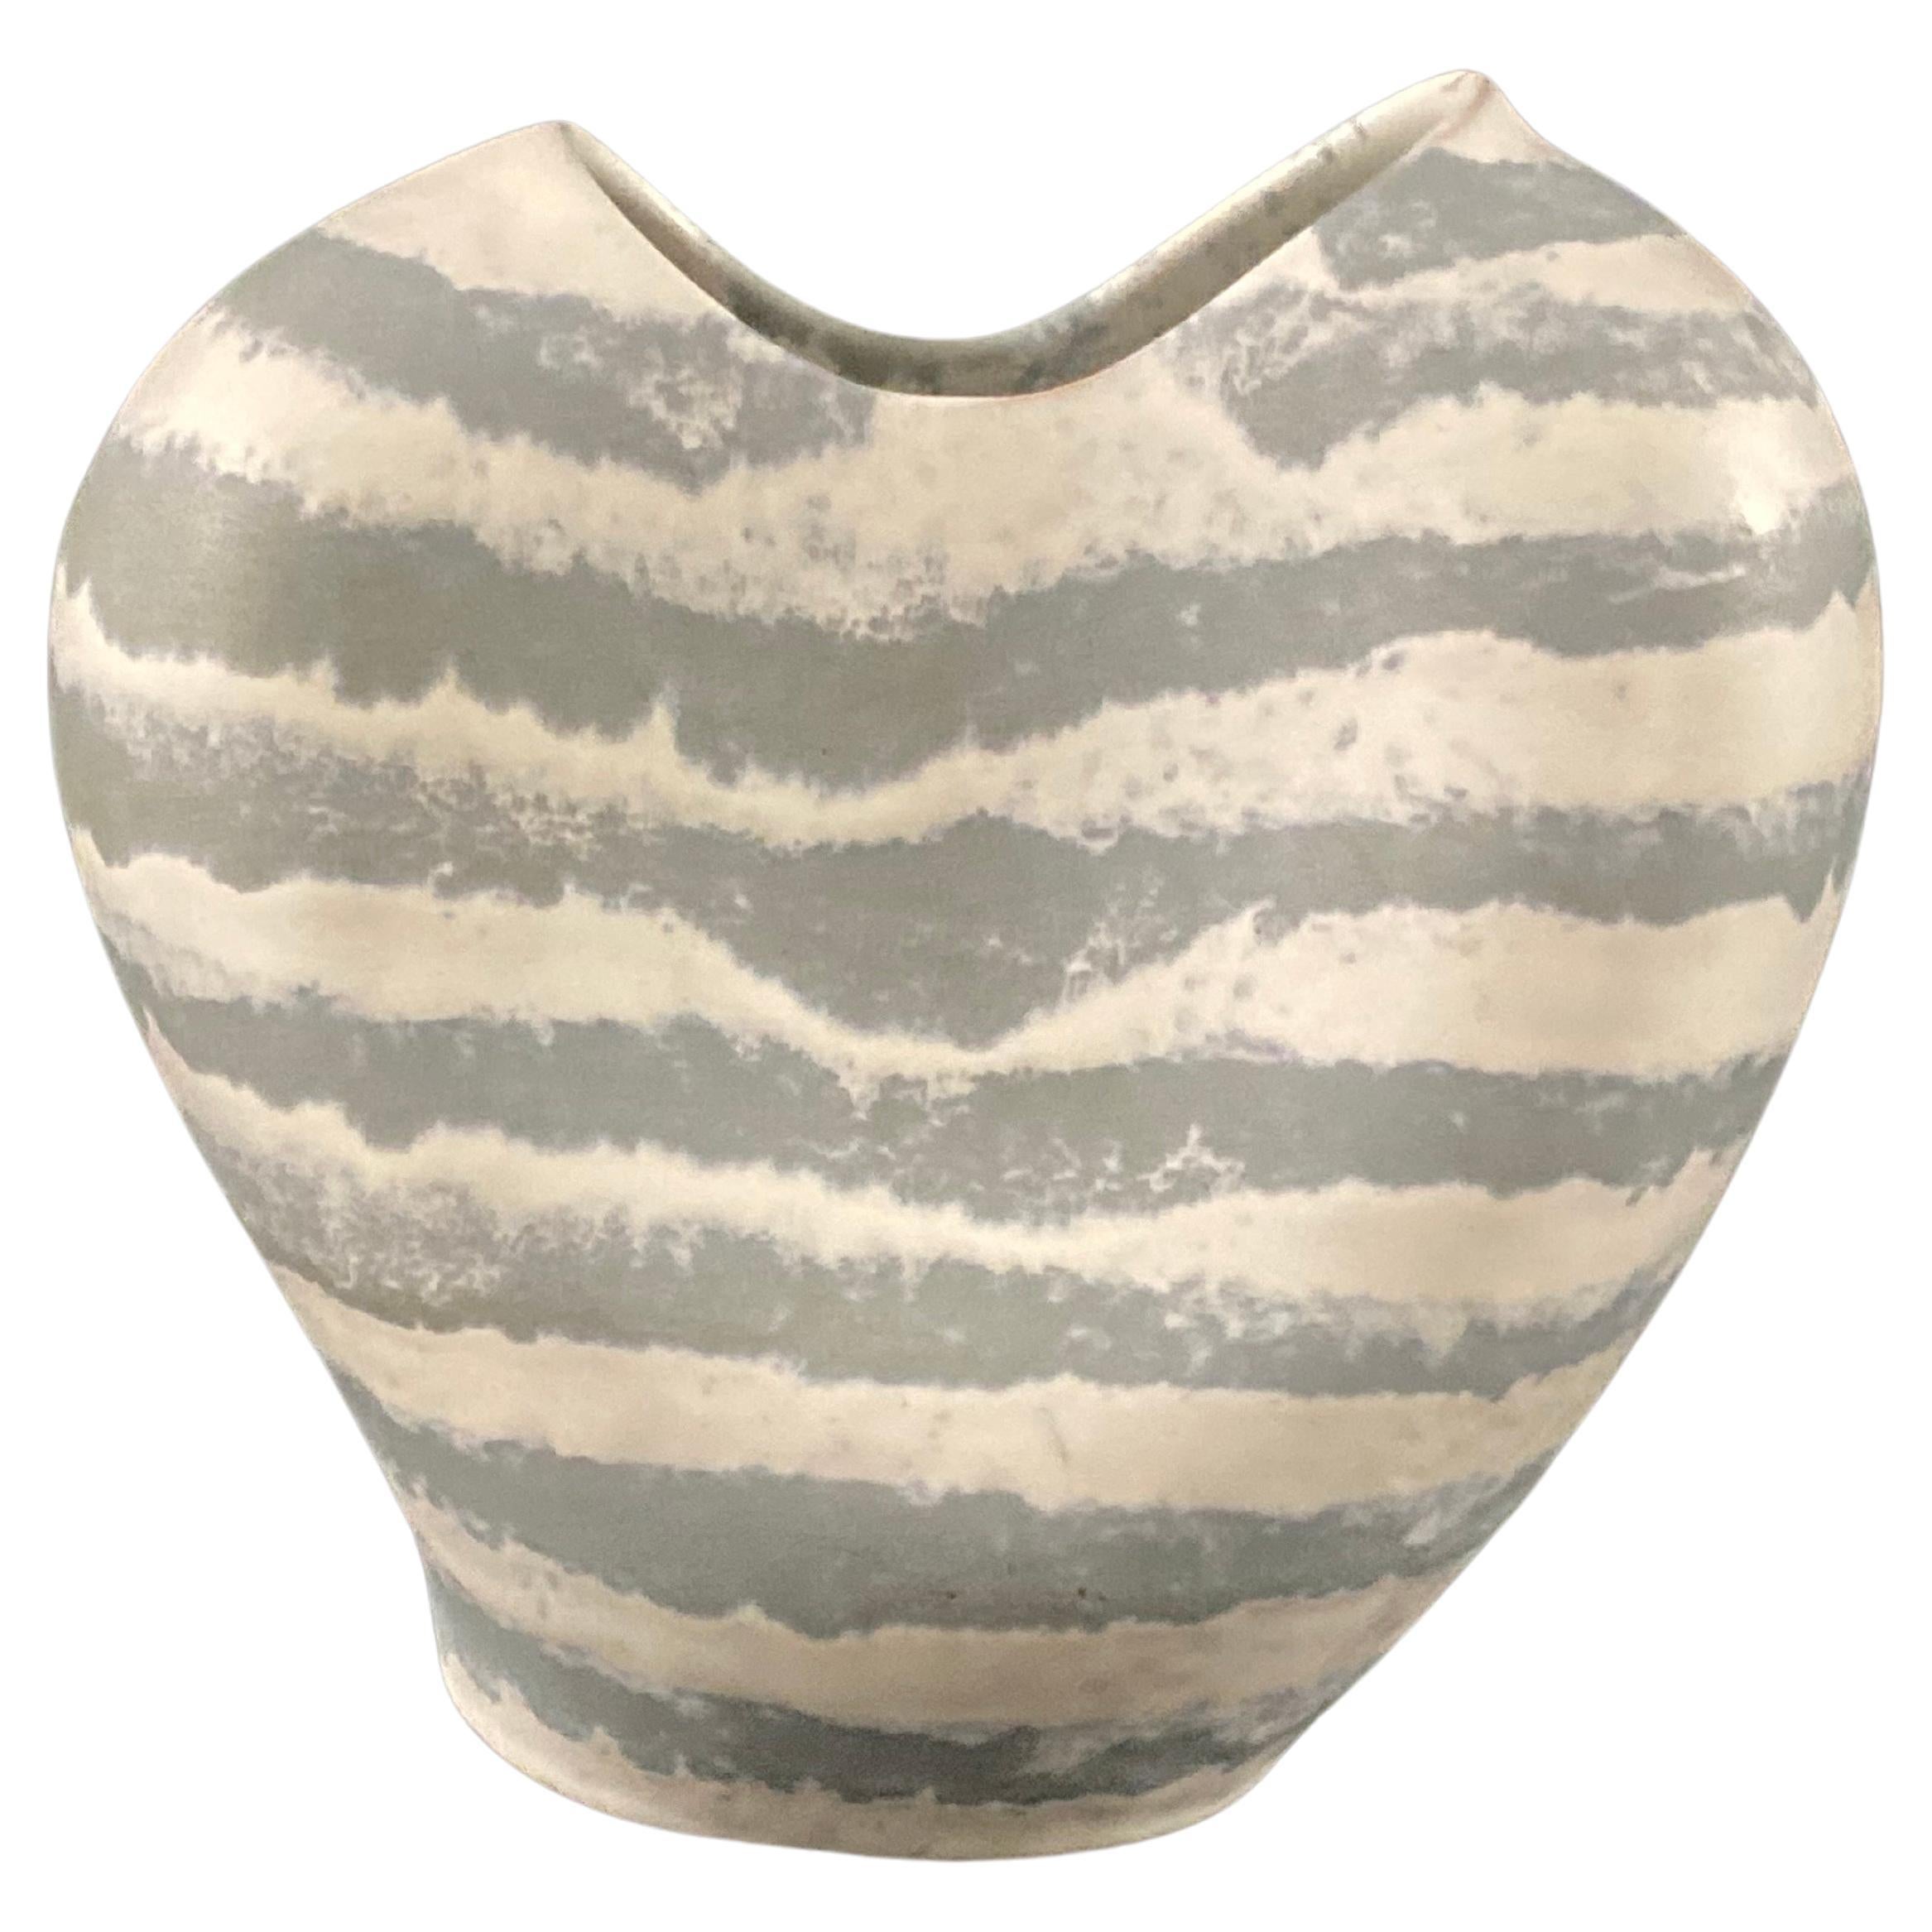 A 1960s West German ceramic vase by Carstens.

Grey and white striped vase of irregular form. Made circa 1960s. Stamped with makers mark of Carstens West Germany under. 

Carstens Tönnieshof began in 1900 but resumed post-war production sometime